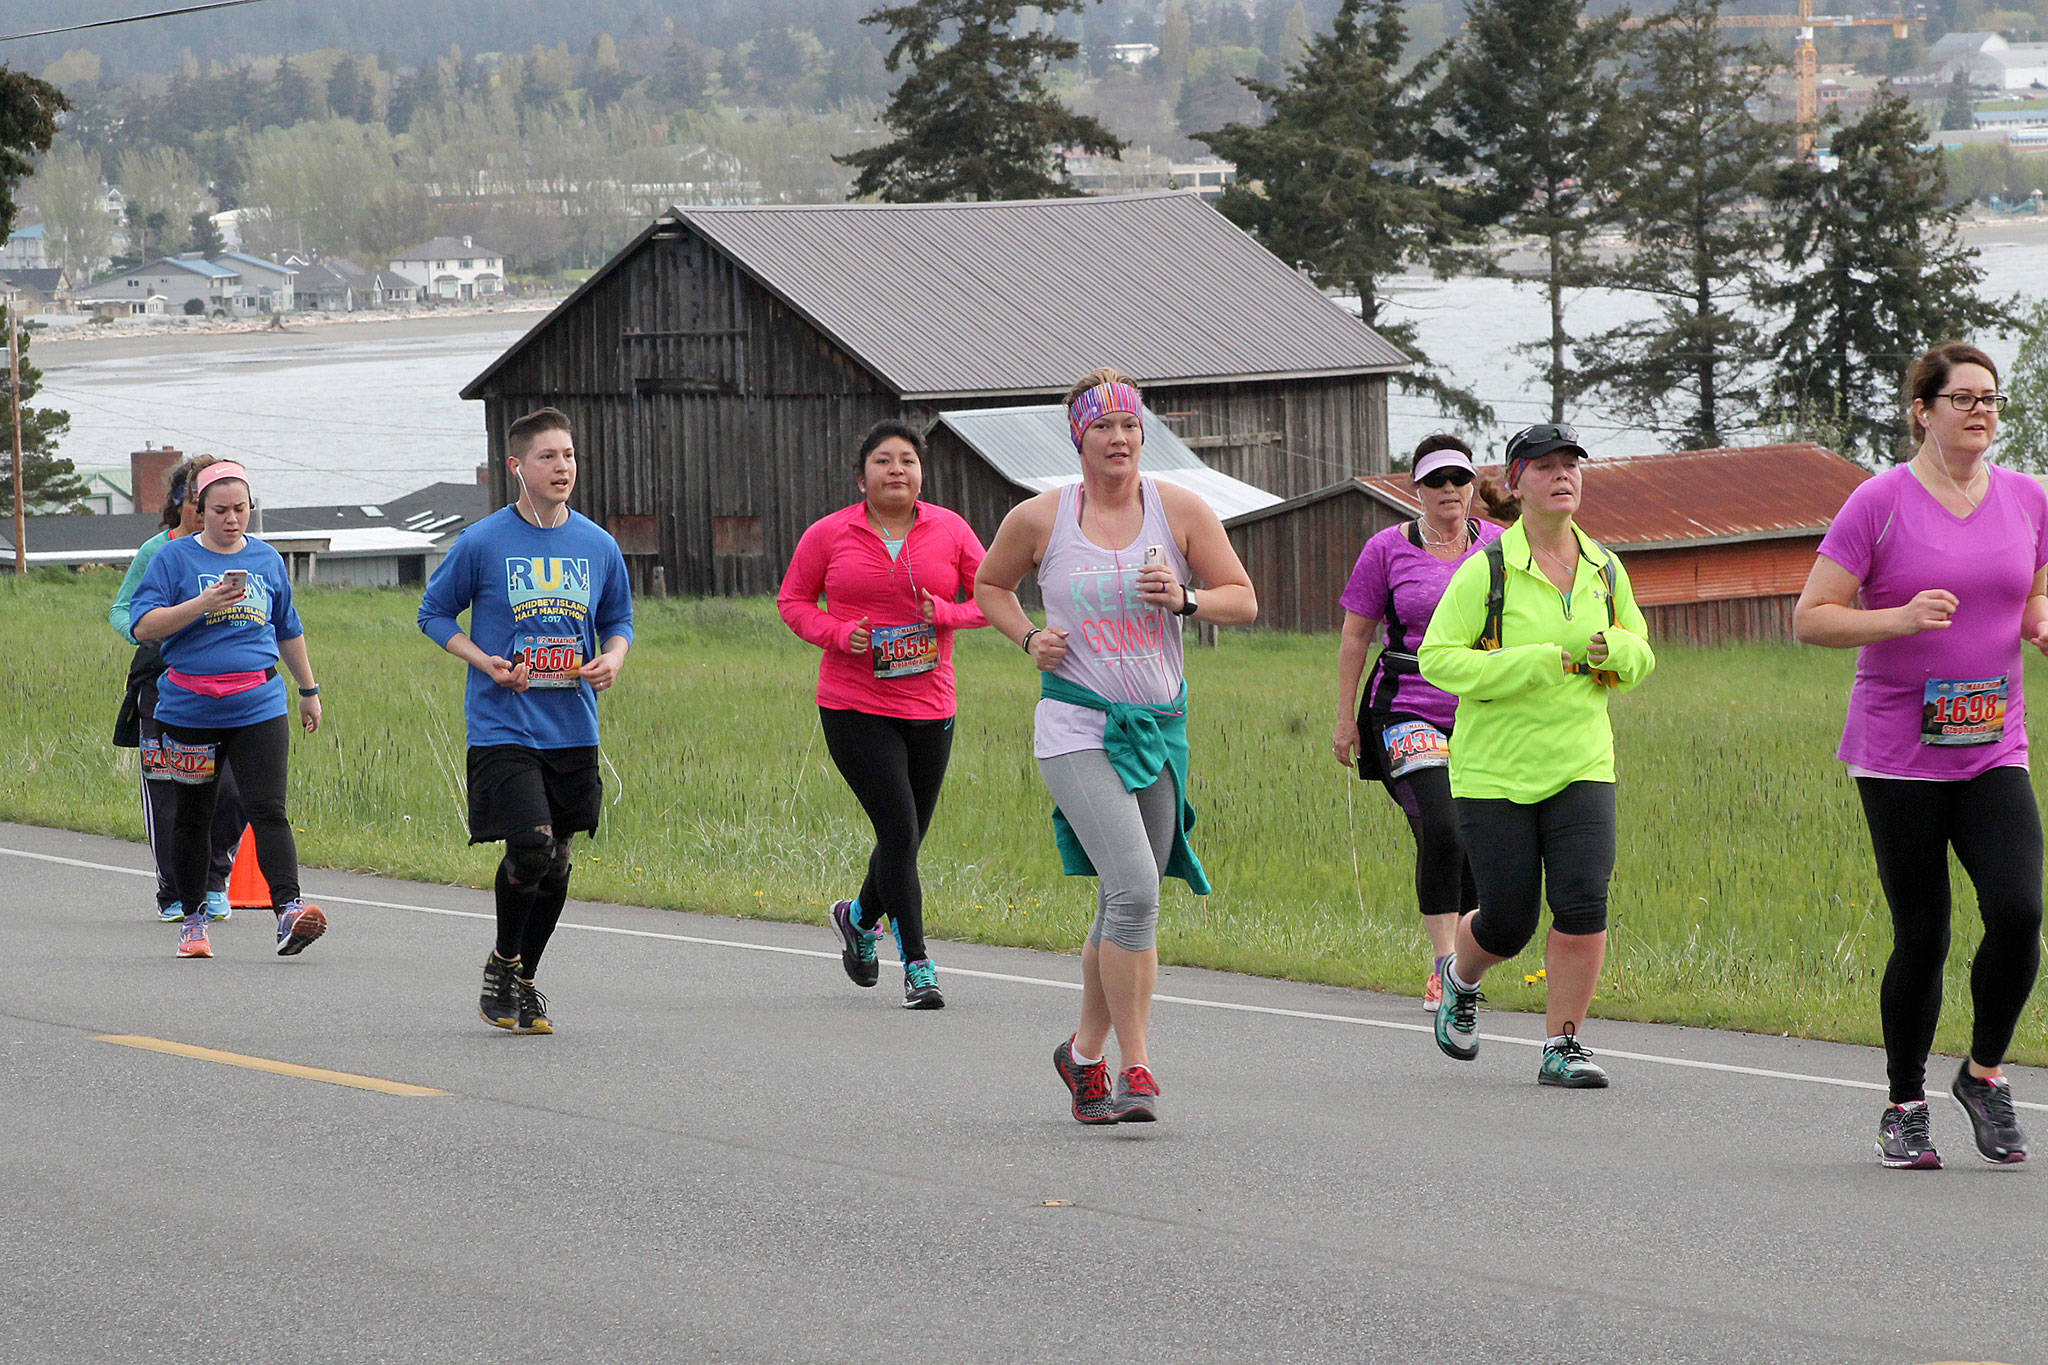 Runners head up Balda Road during one of the campanion races of the Whidbey Island Marathon in 2017. (Photo by Jim Waller/Whidbey News-Times)